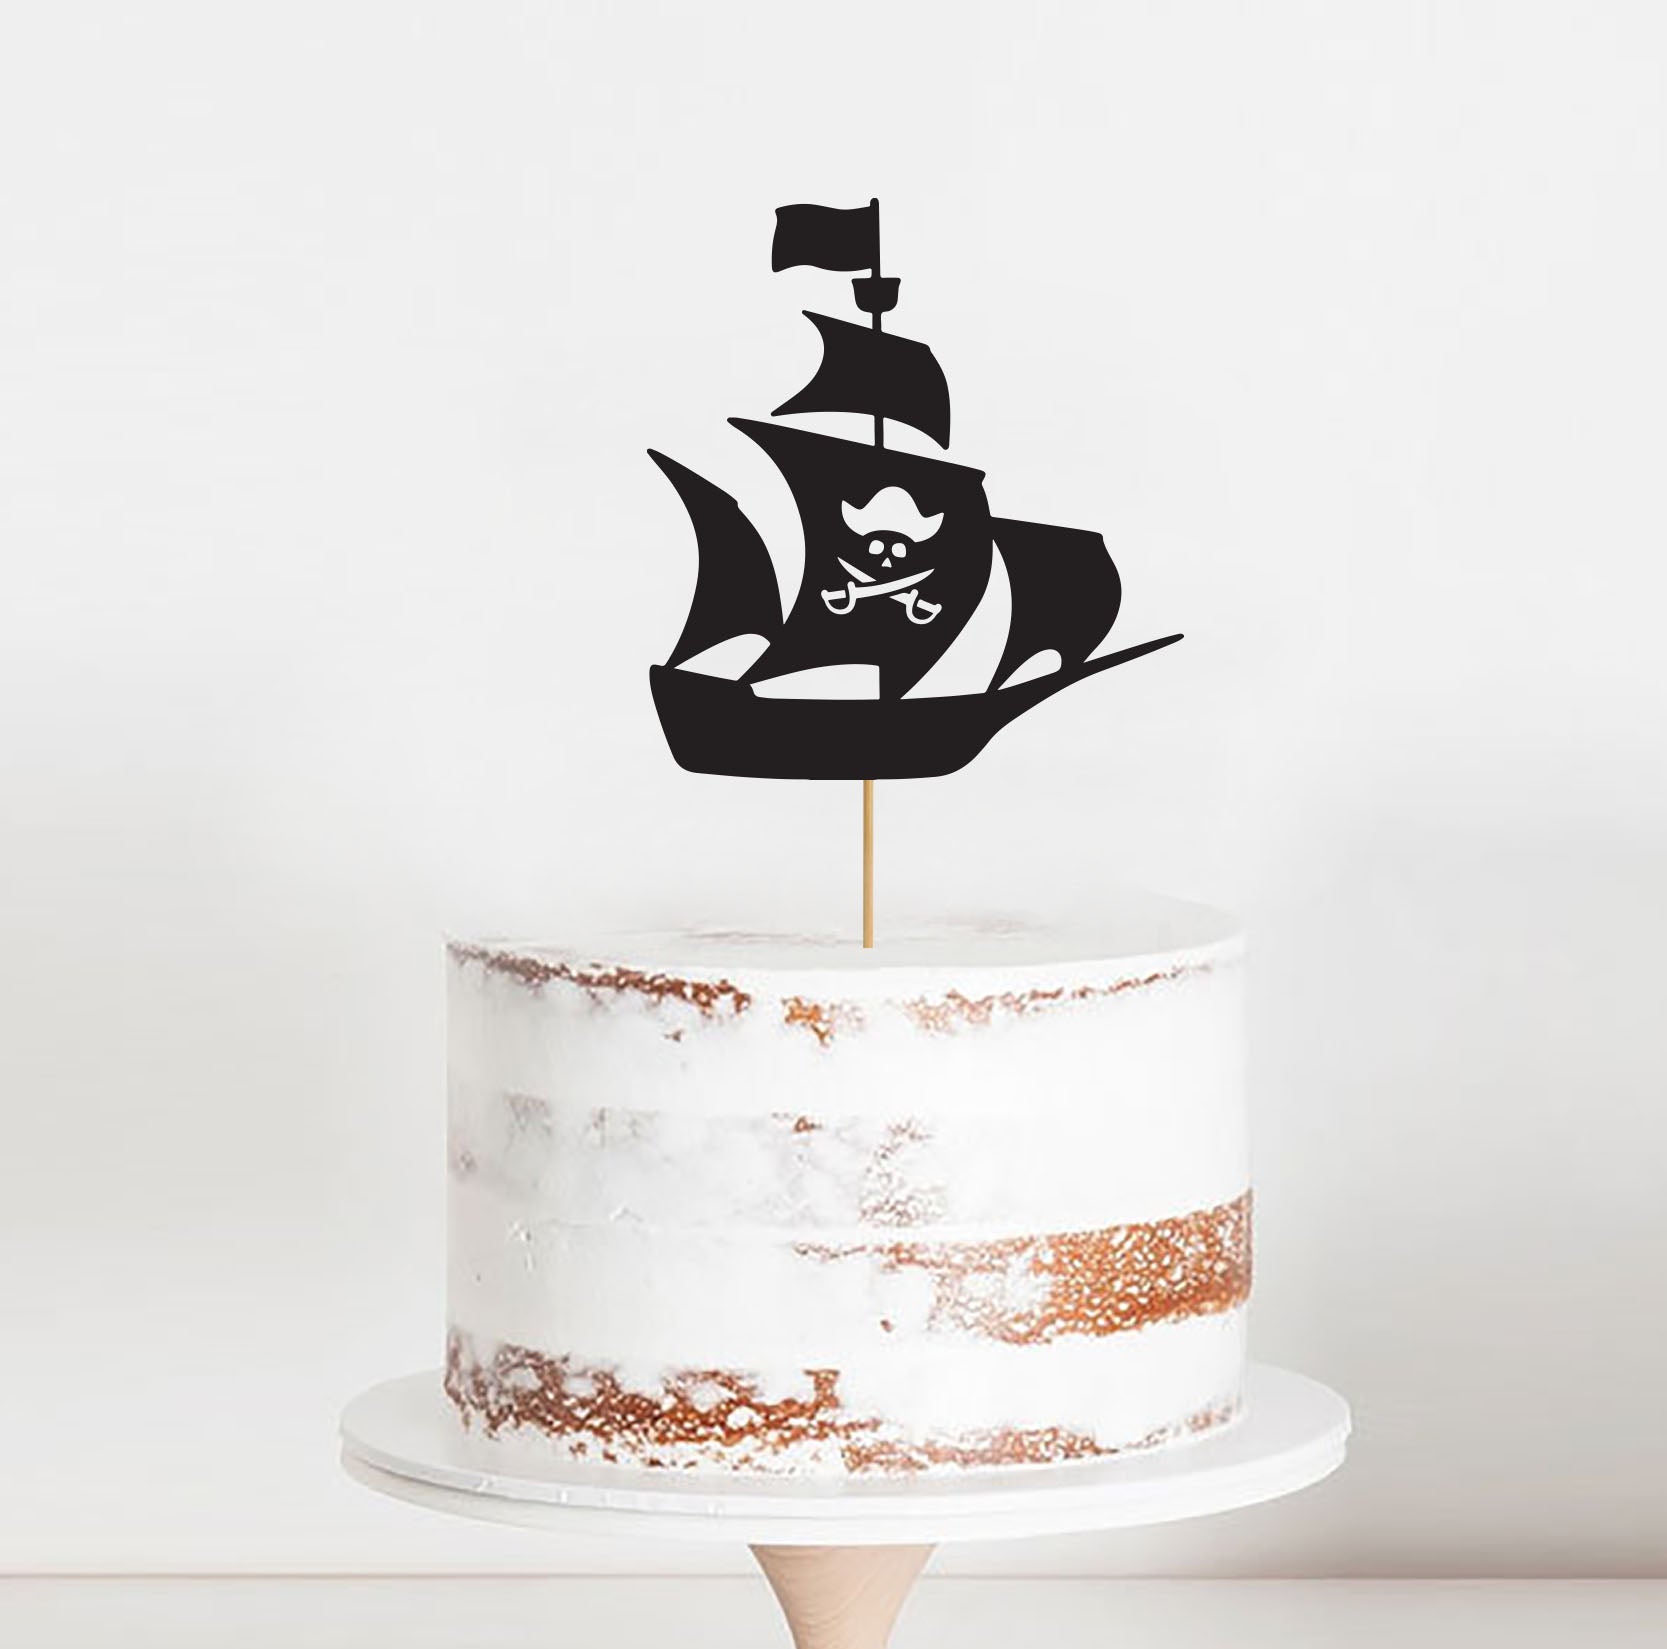 PIRATES & PALM TREE CAKE TOPPERS – Bonjour Fête